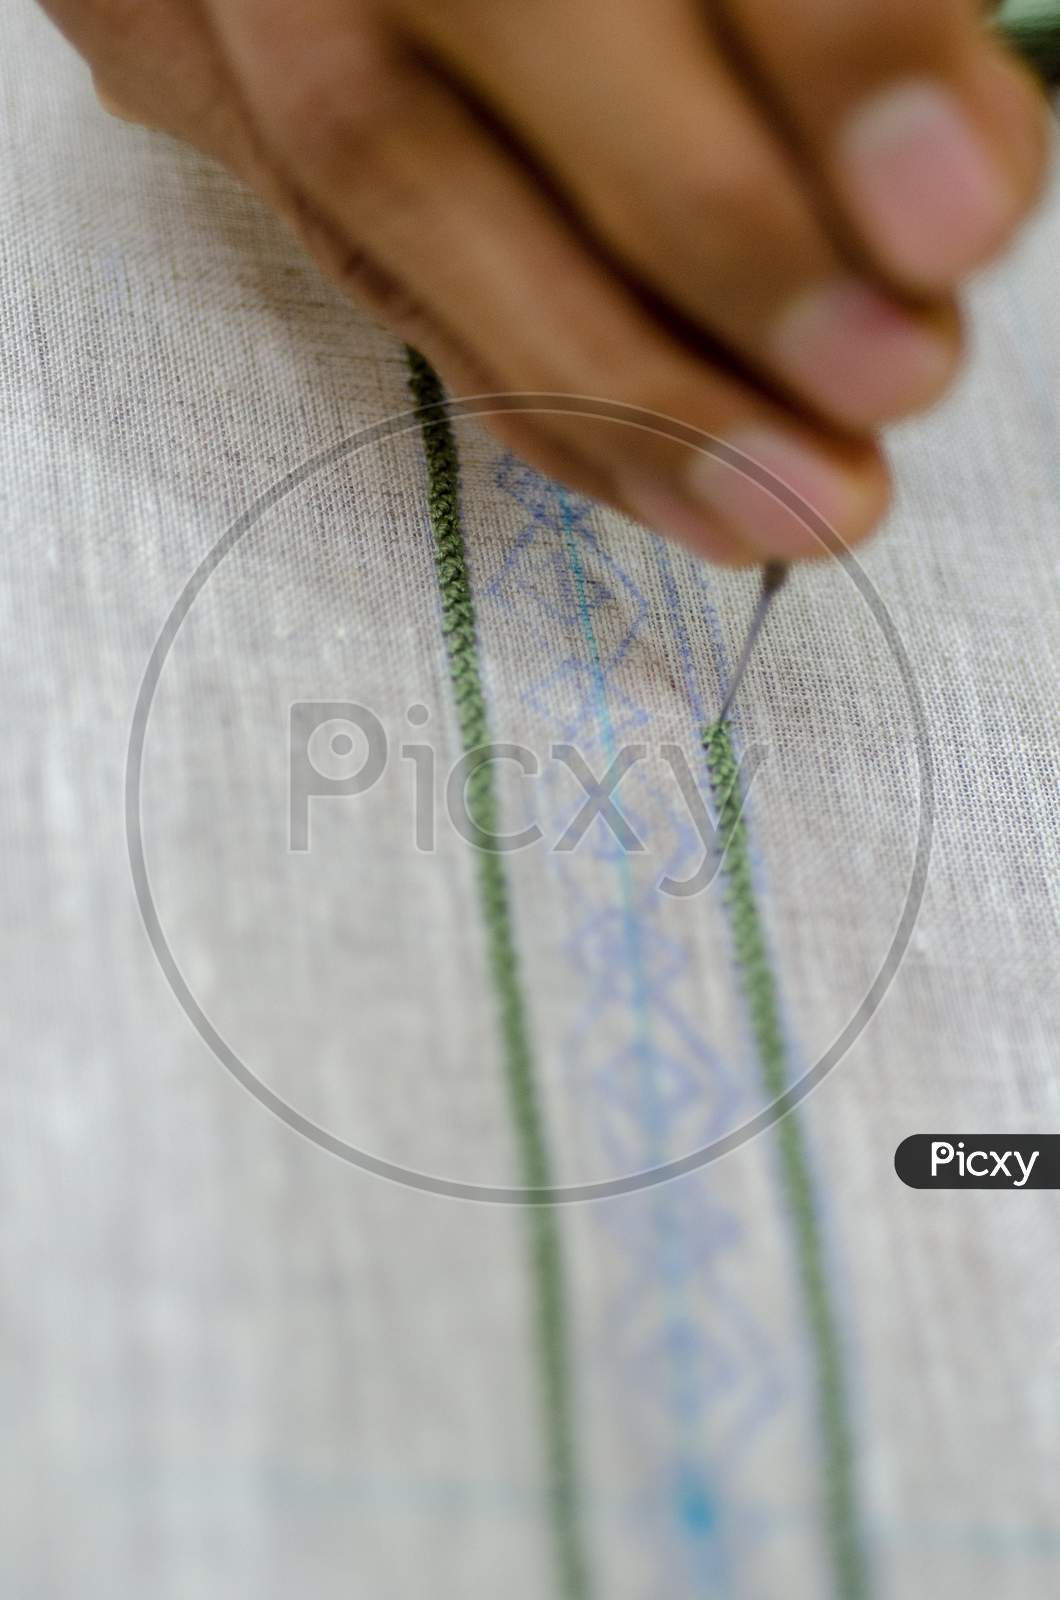 An Embroidery Worker Stitching Design on a Fabric Closeup